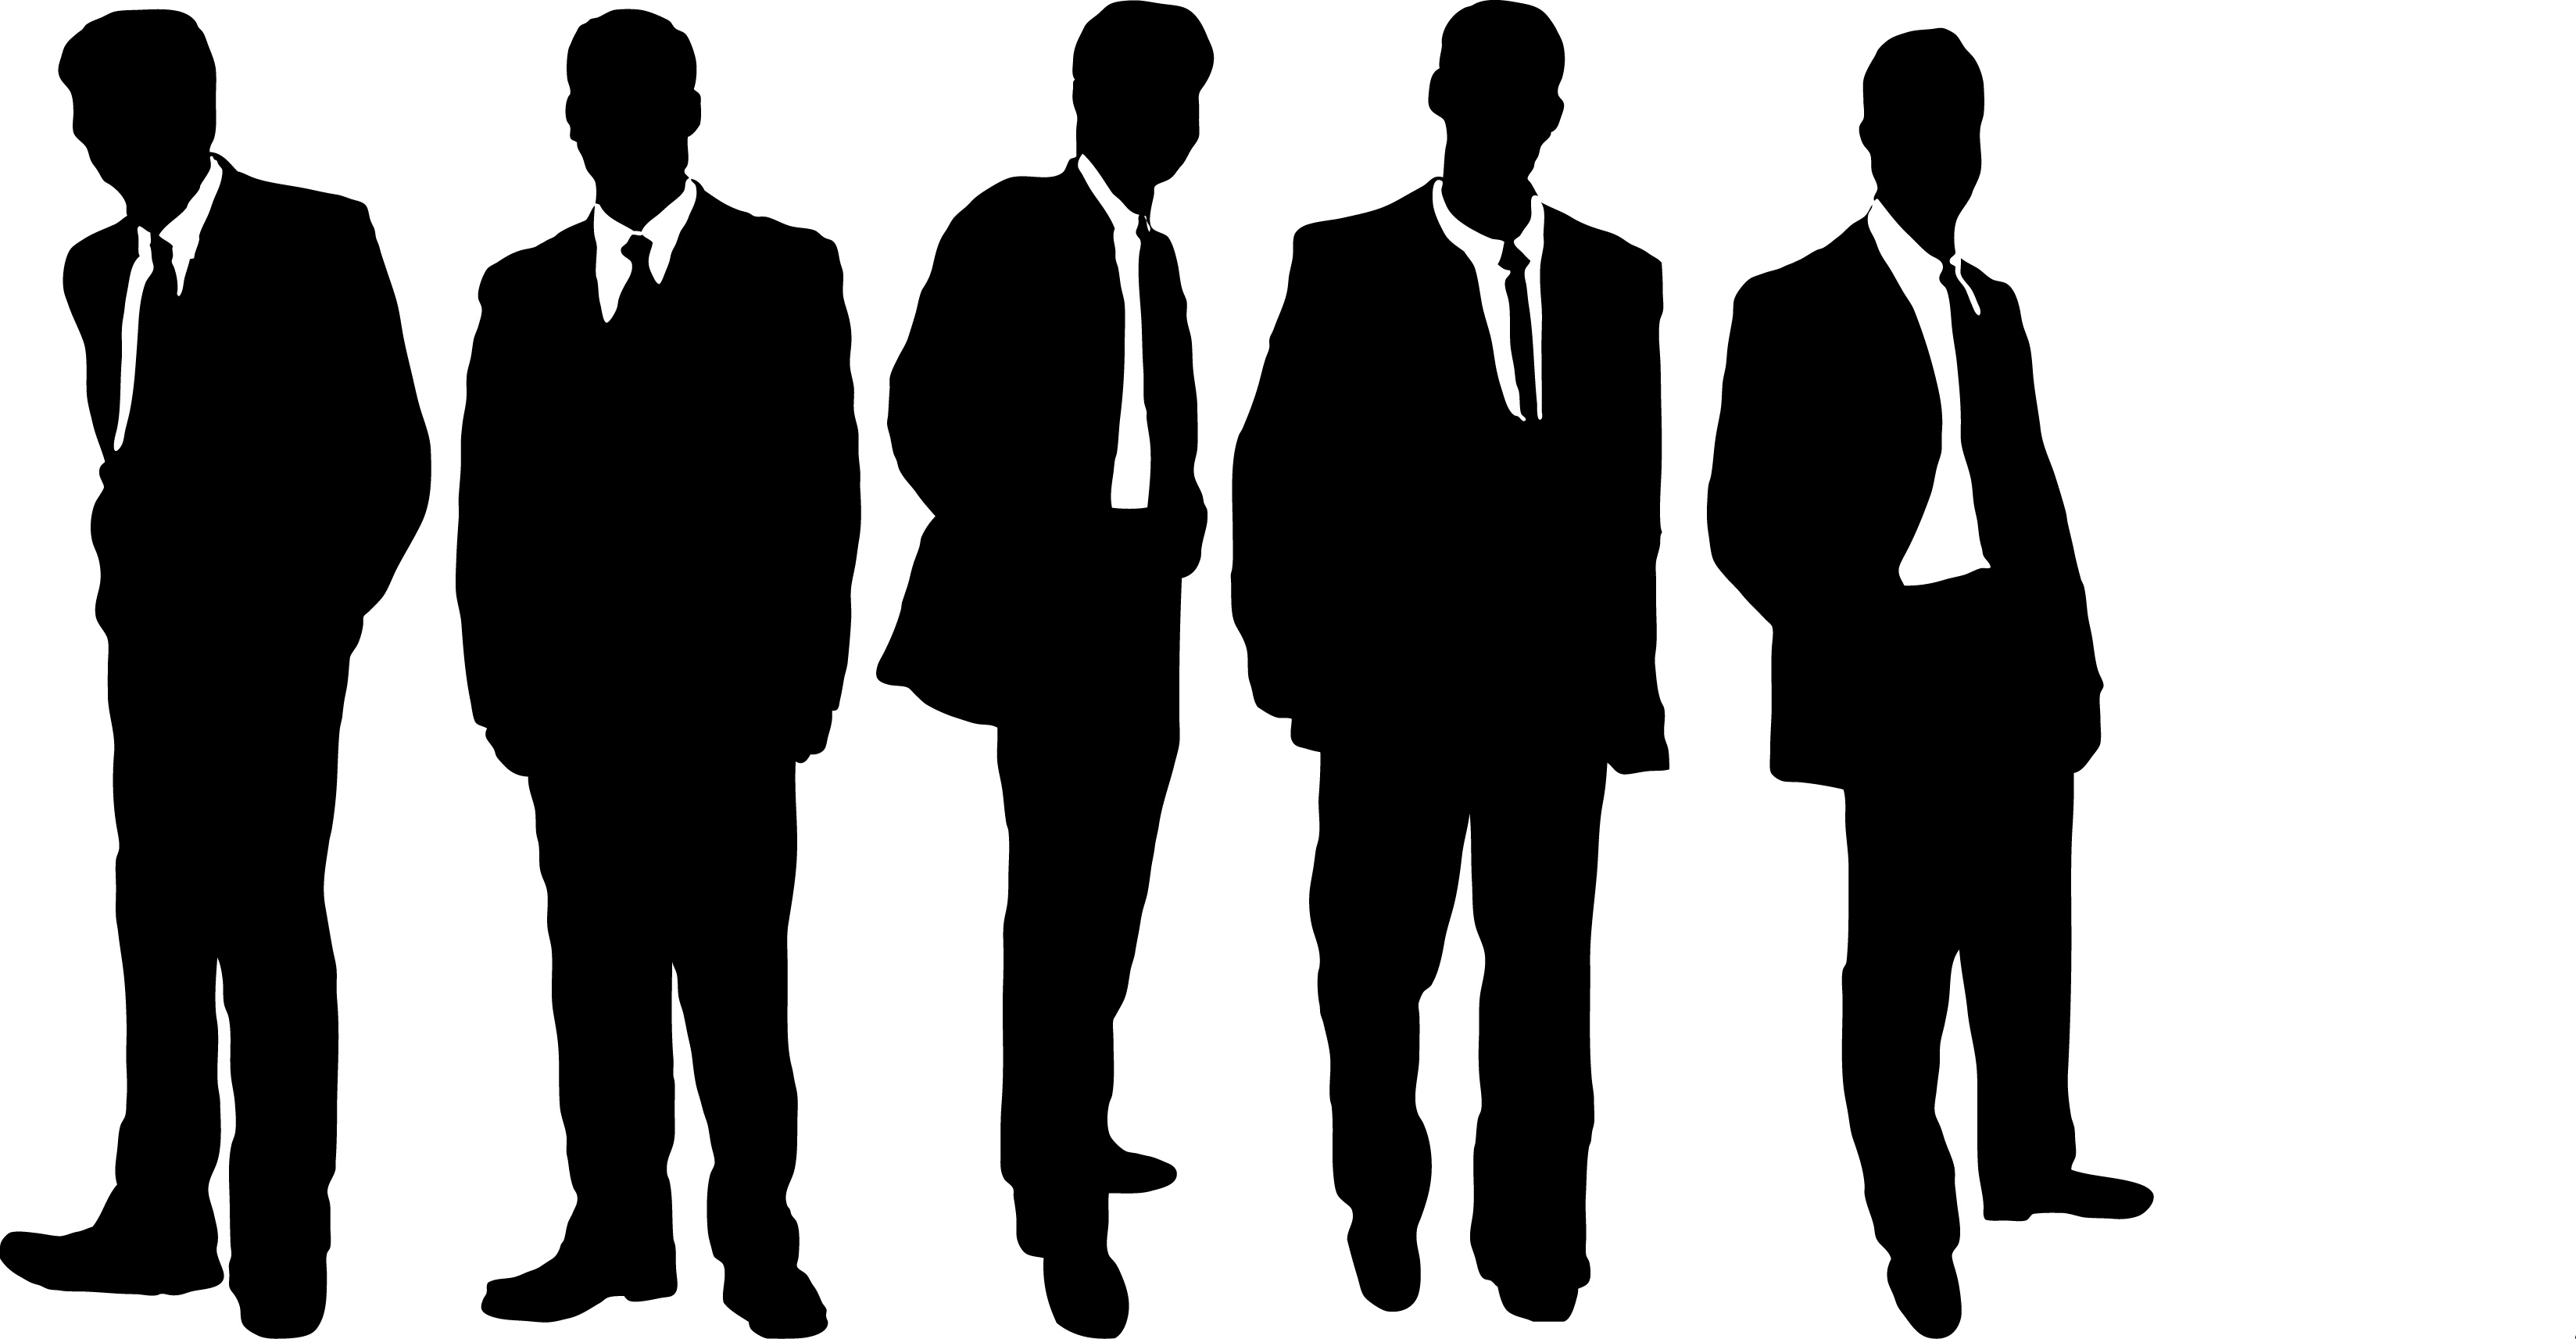 People silhouette clipart black and white 